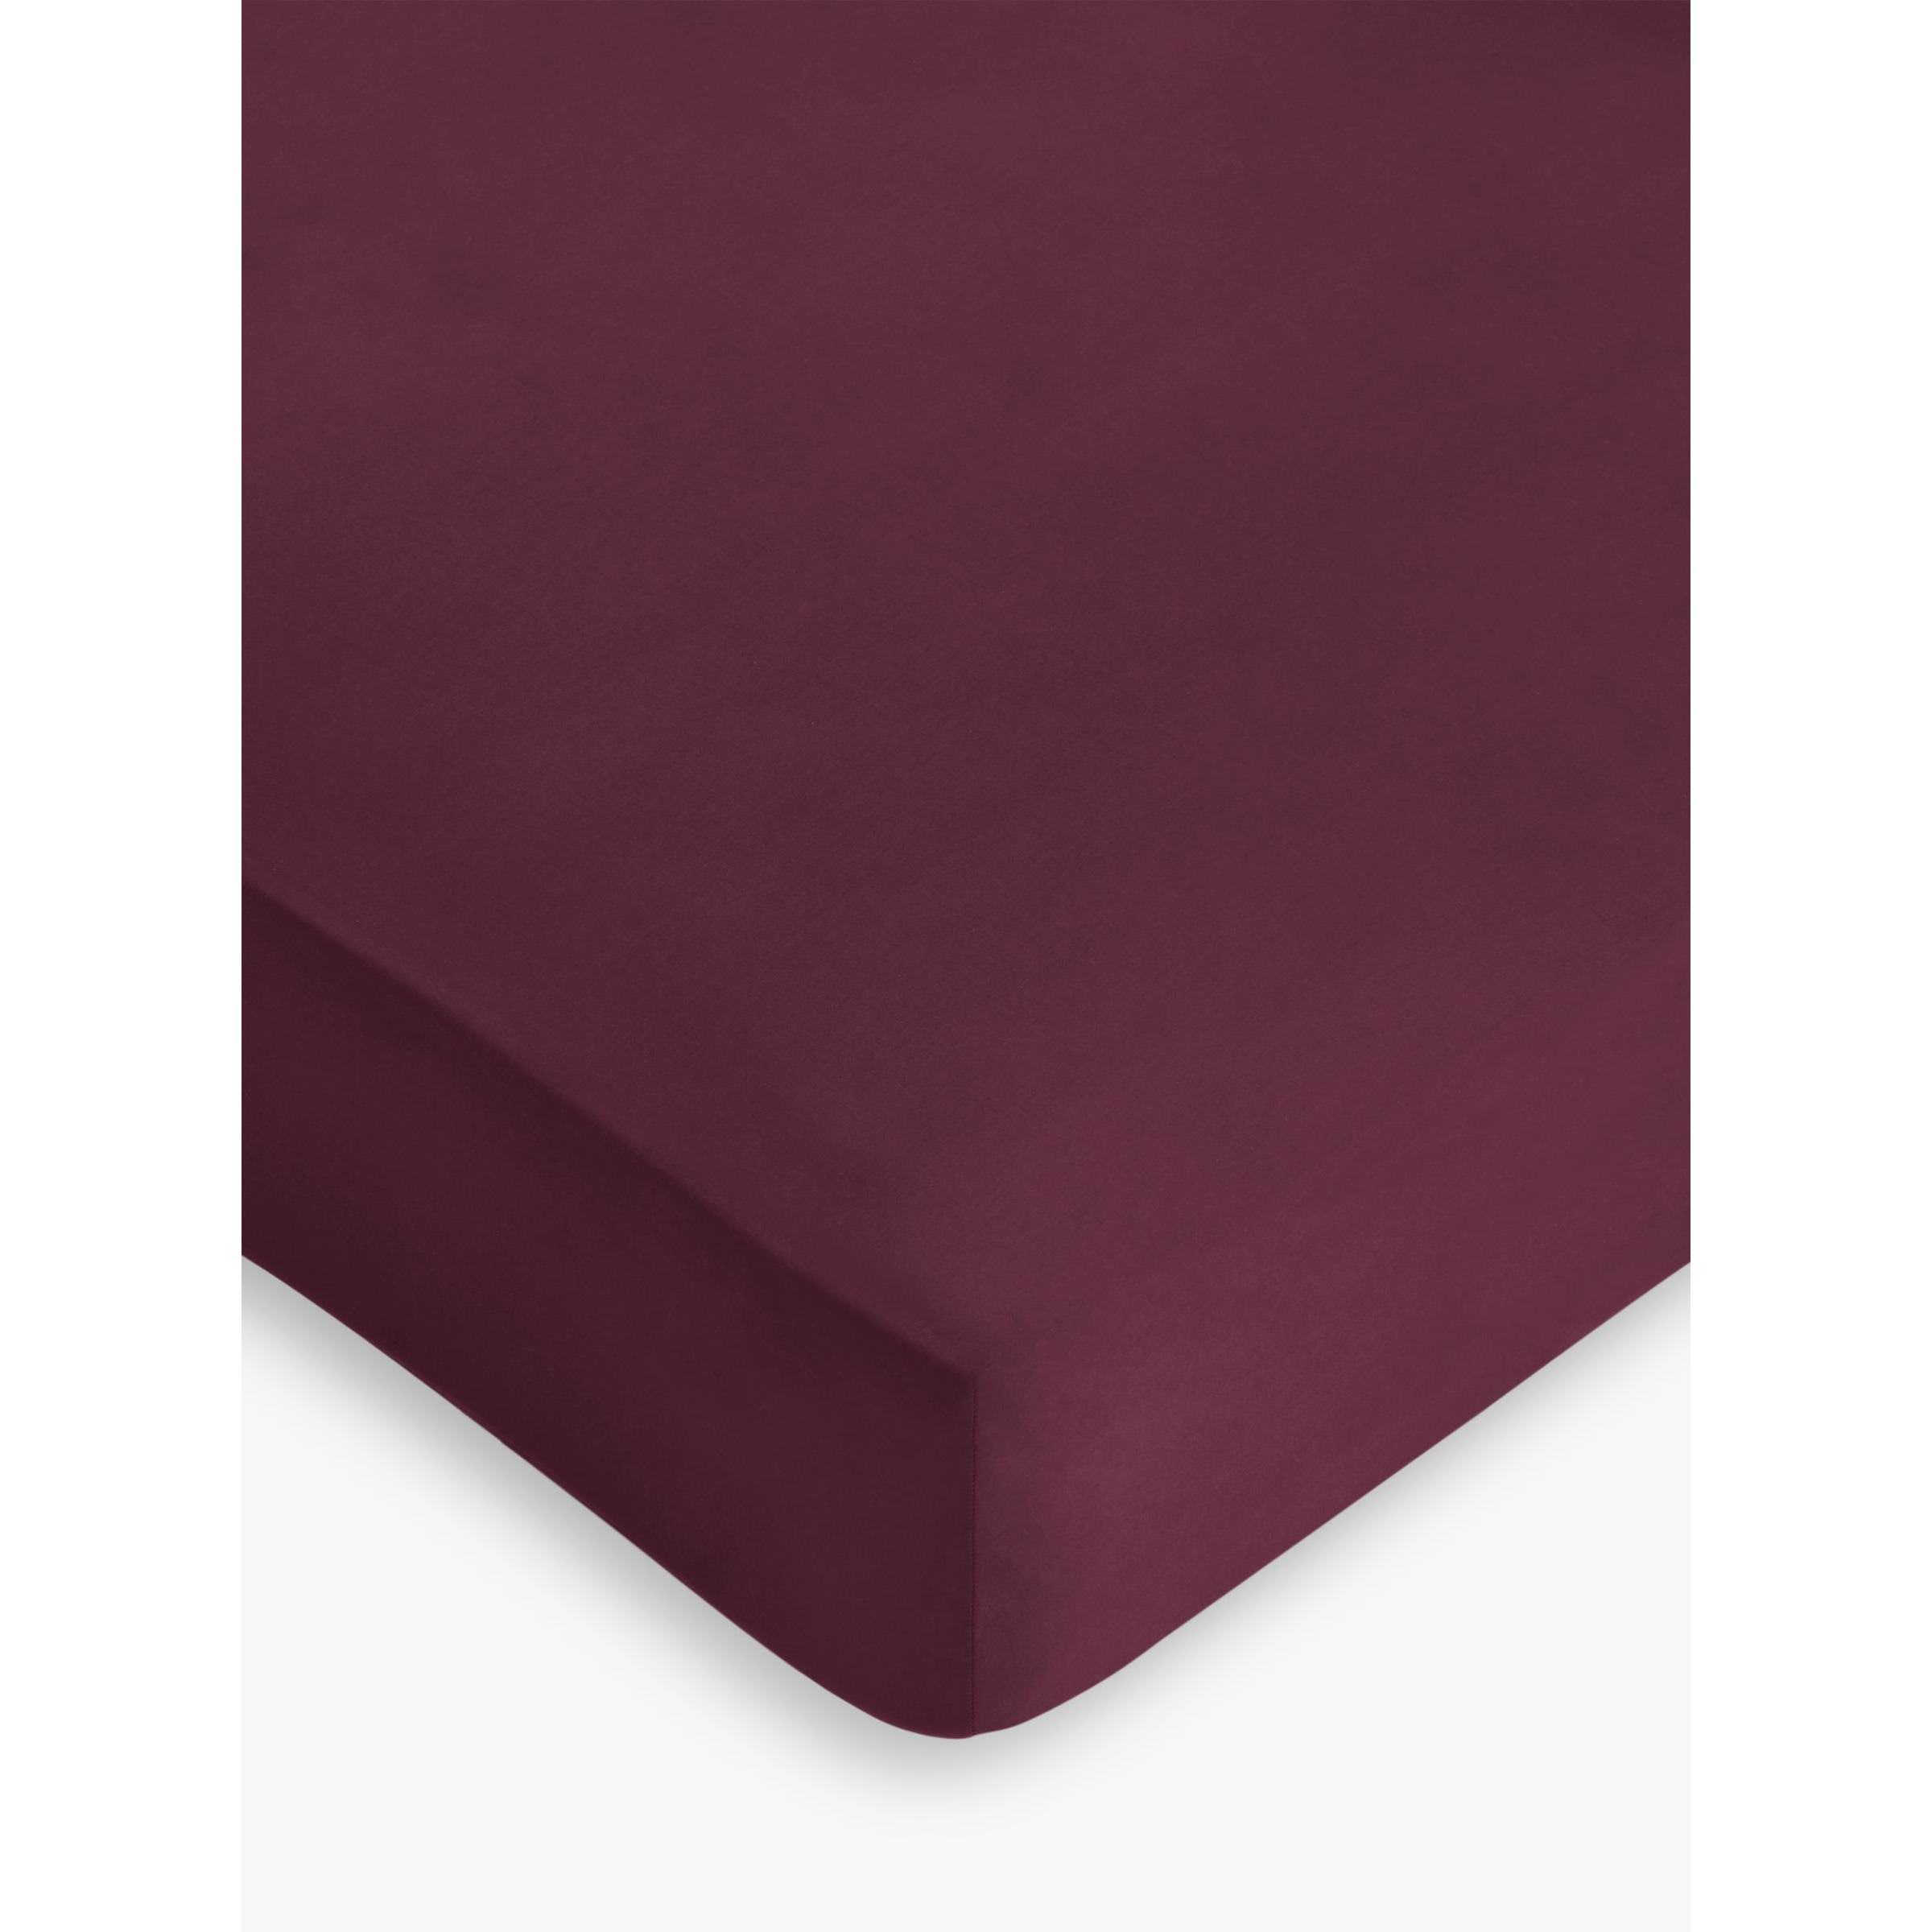 John Lewis Soft & Silky 400 Thread Count Egyptian Cotton Deep Fitted Sheet - image 1